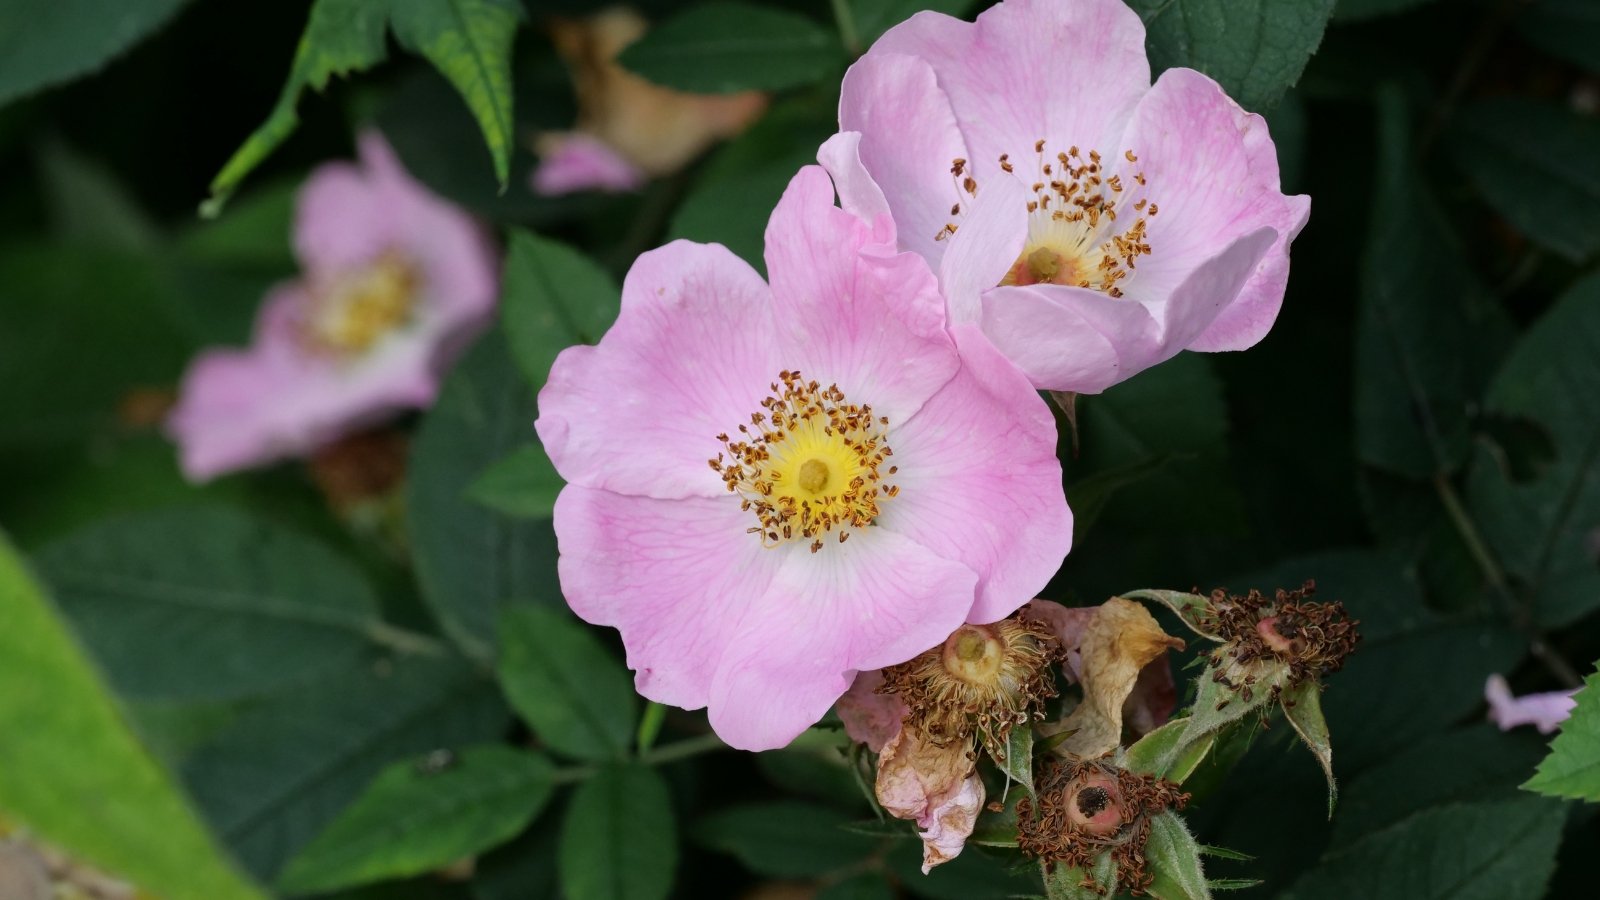 Rosa carolina boasts straight, thorny stems, glossy, dark green leaves, and charming, single pink flowers with yellow stamens.